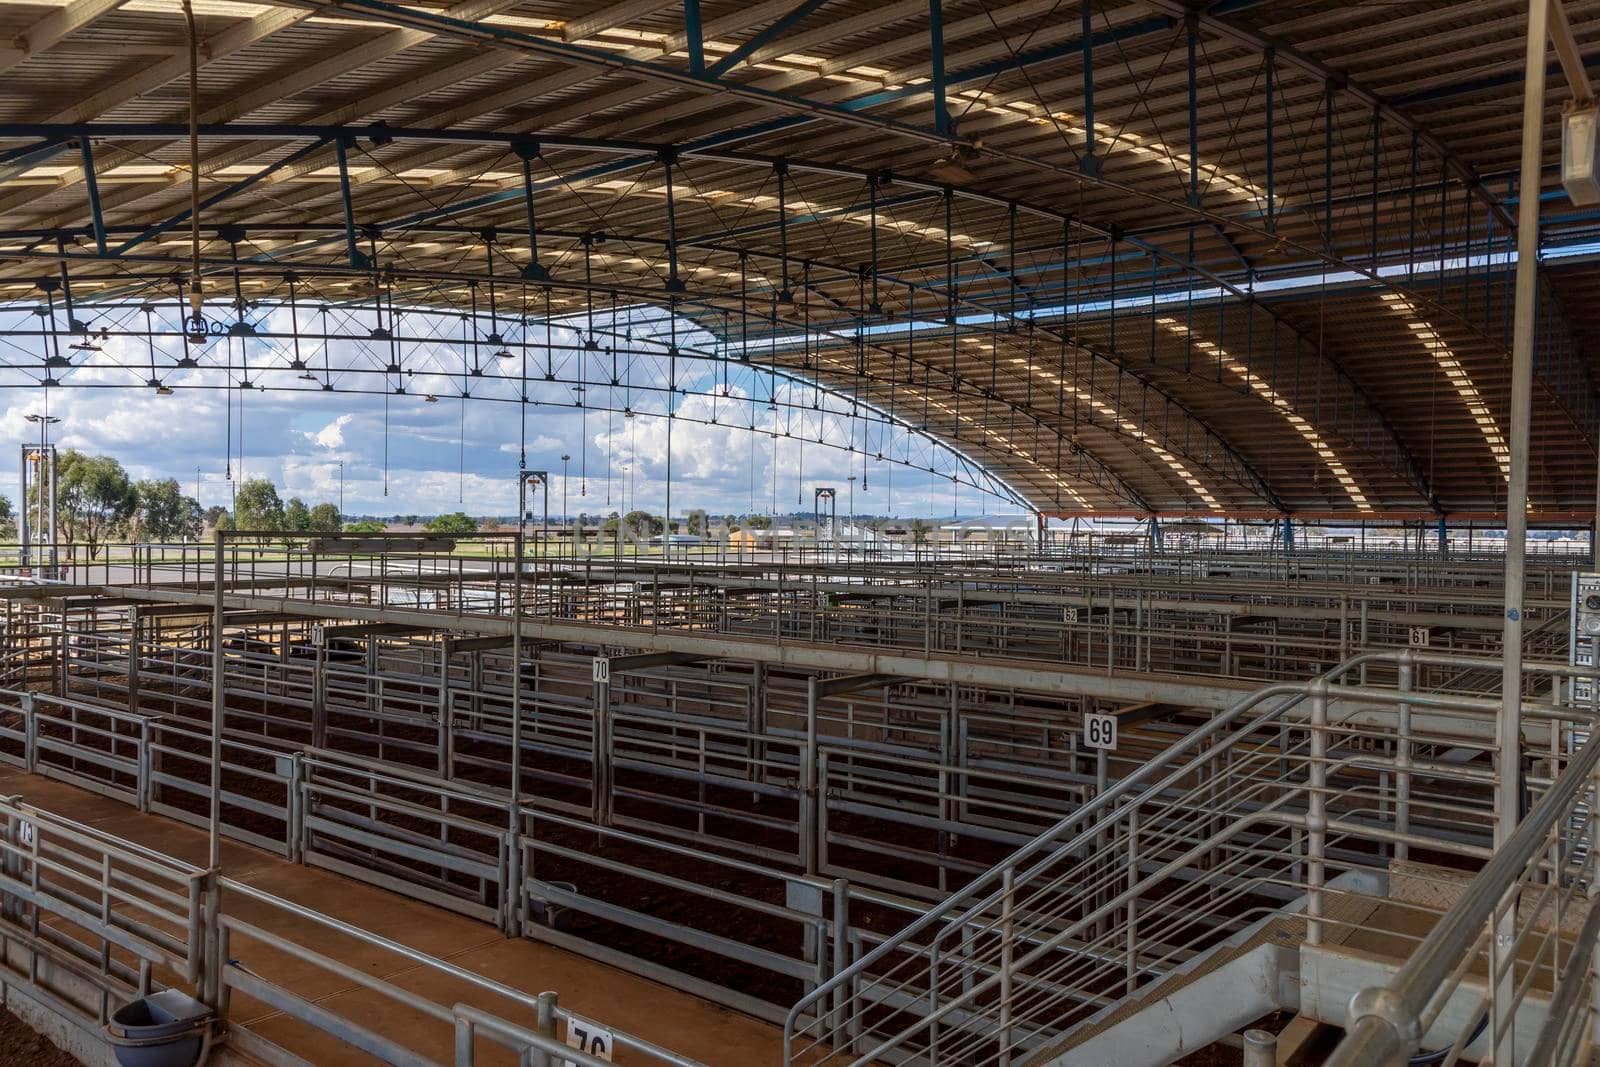 The Central West Livestock Exchange near Forbes in regional Australia by WittkePhotos